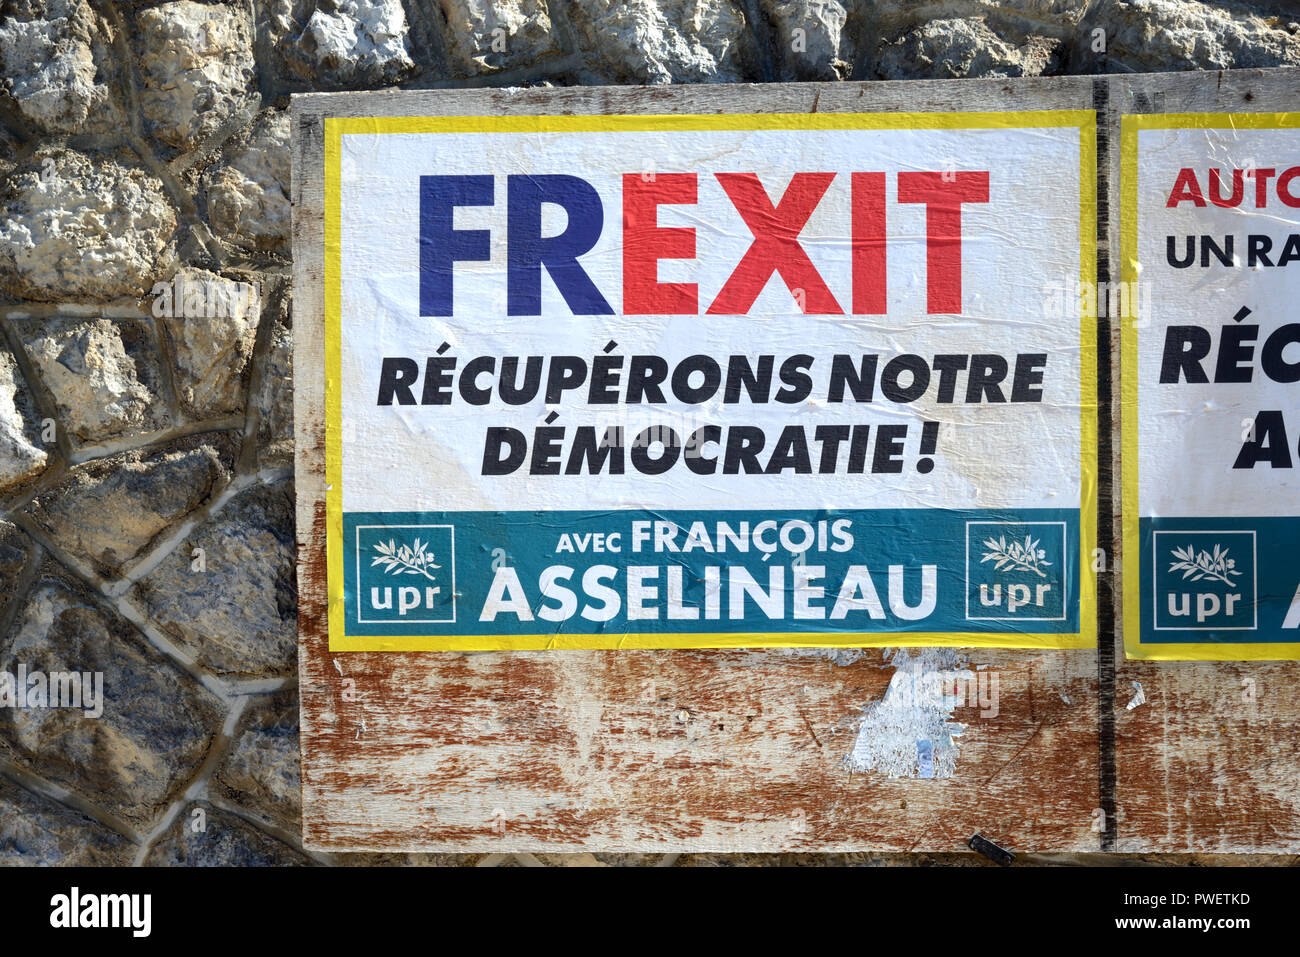 Frexit Election Poster Campaigning for France to Leave the European Community Stock Photo